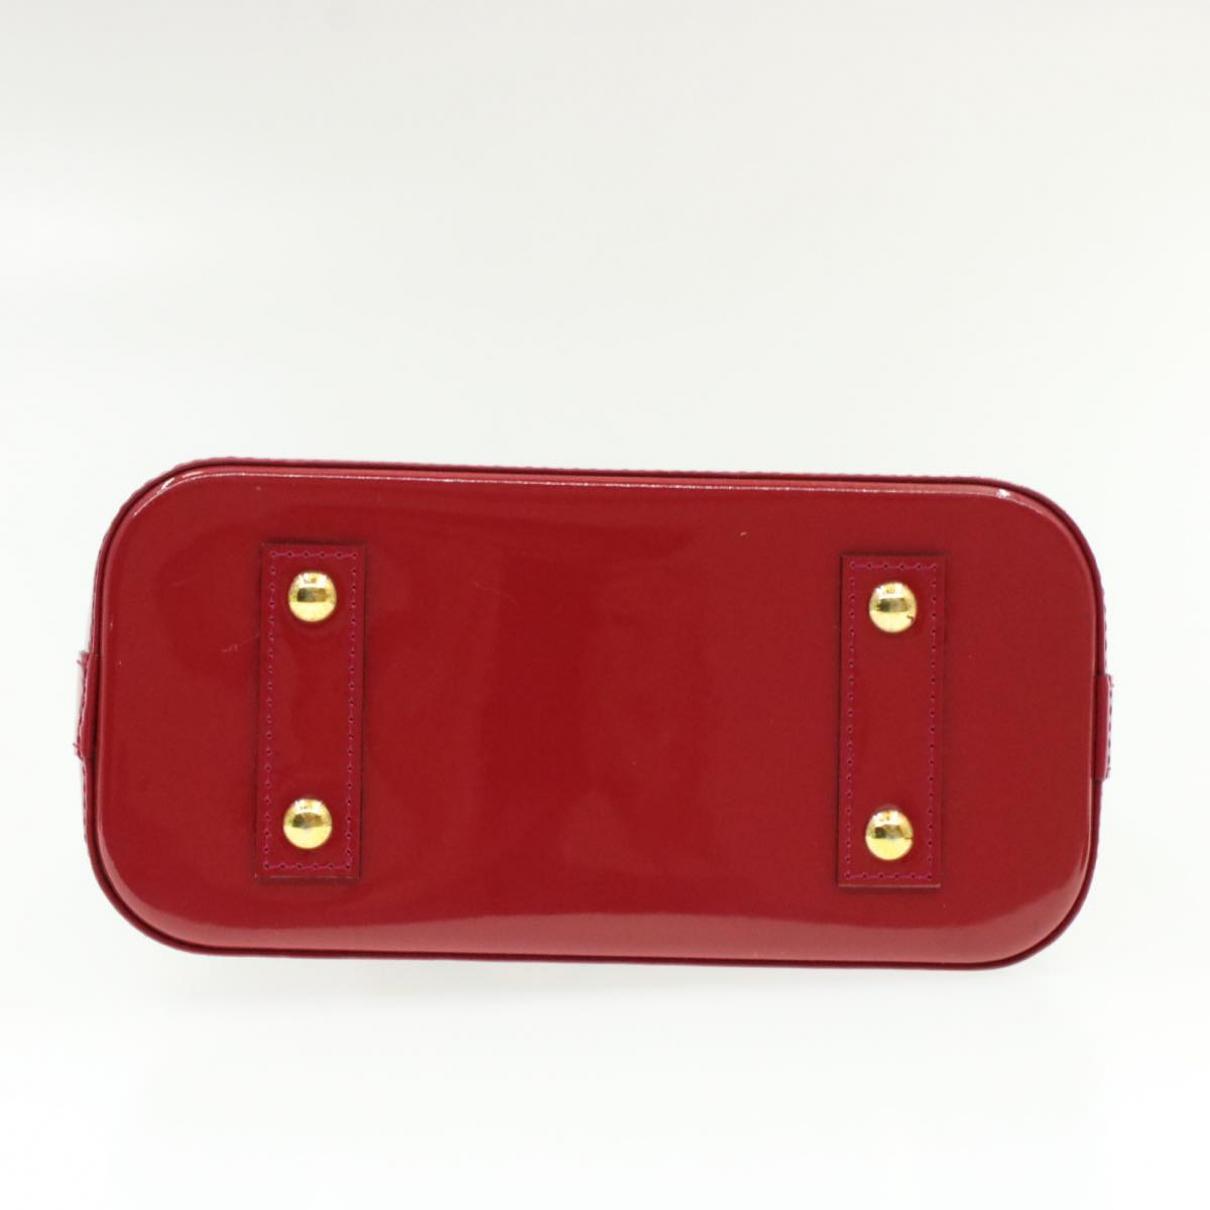 Louis Vuitton Alma Bb Patent Leather Handbag in Red - Lyst